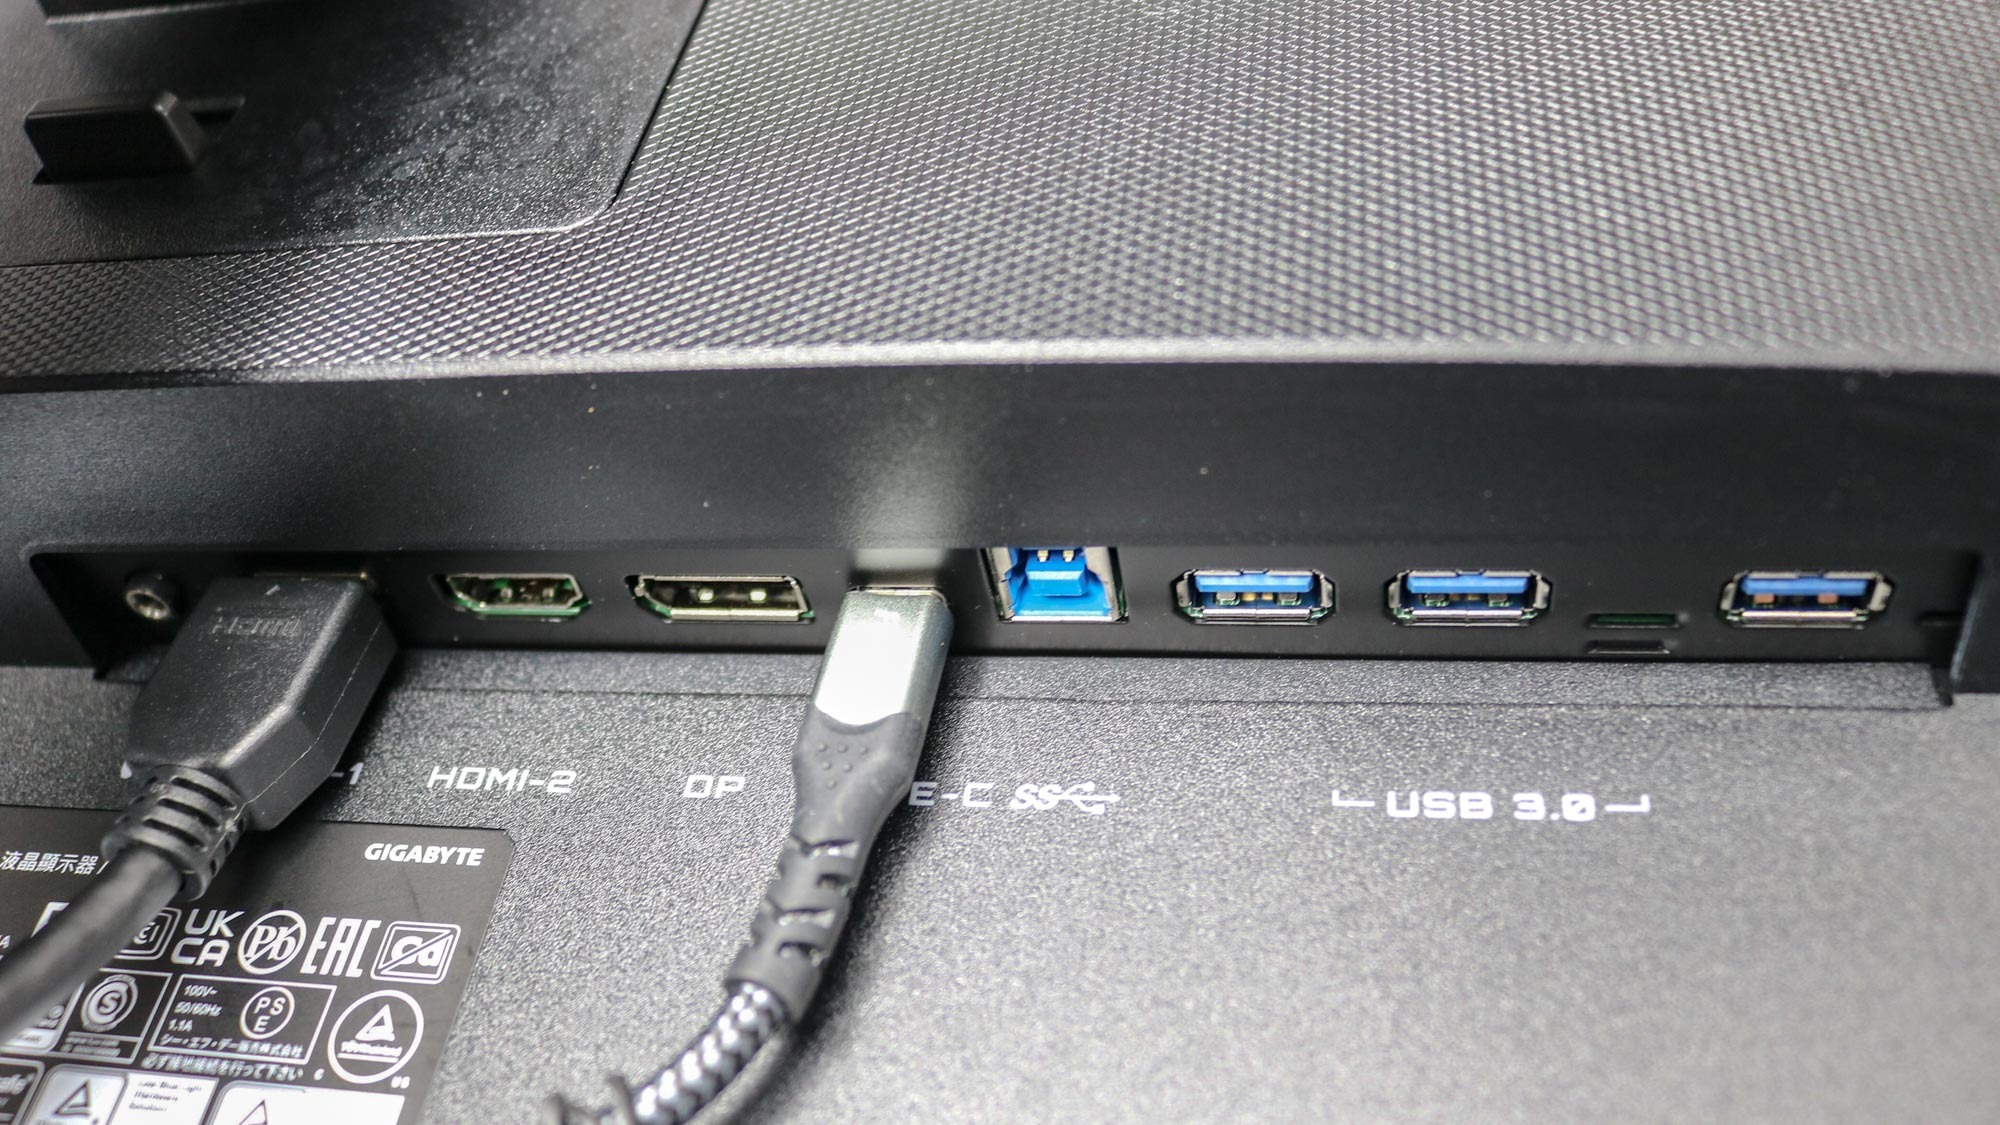 The ports on the back of the Gigabyte M28U gaming monitor